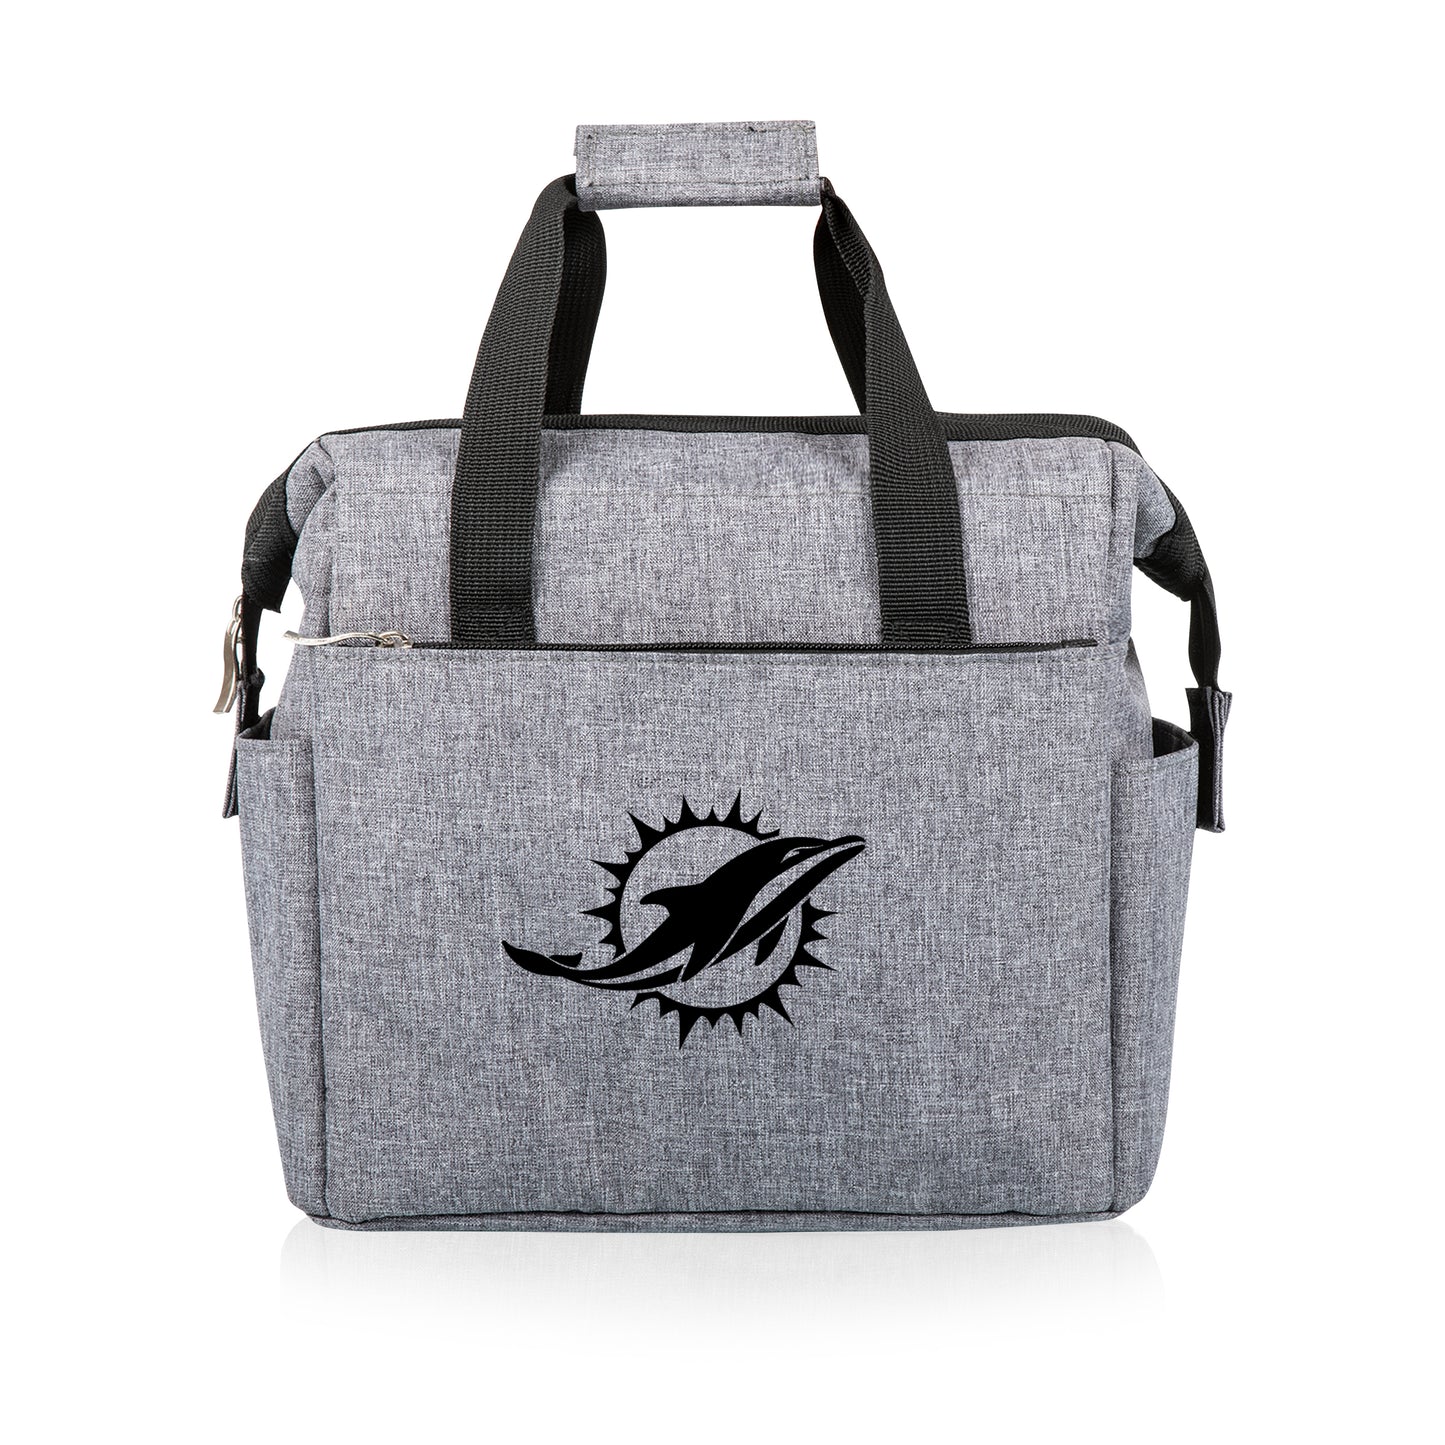 Miami Dolphins - On The Go Lunch Cooler